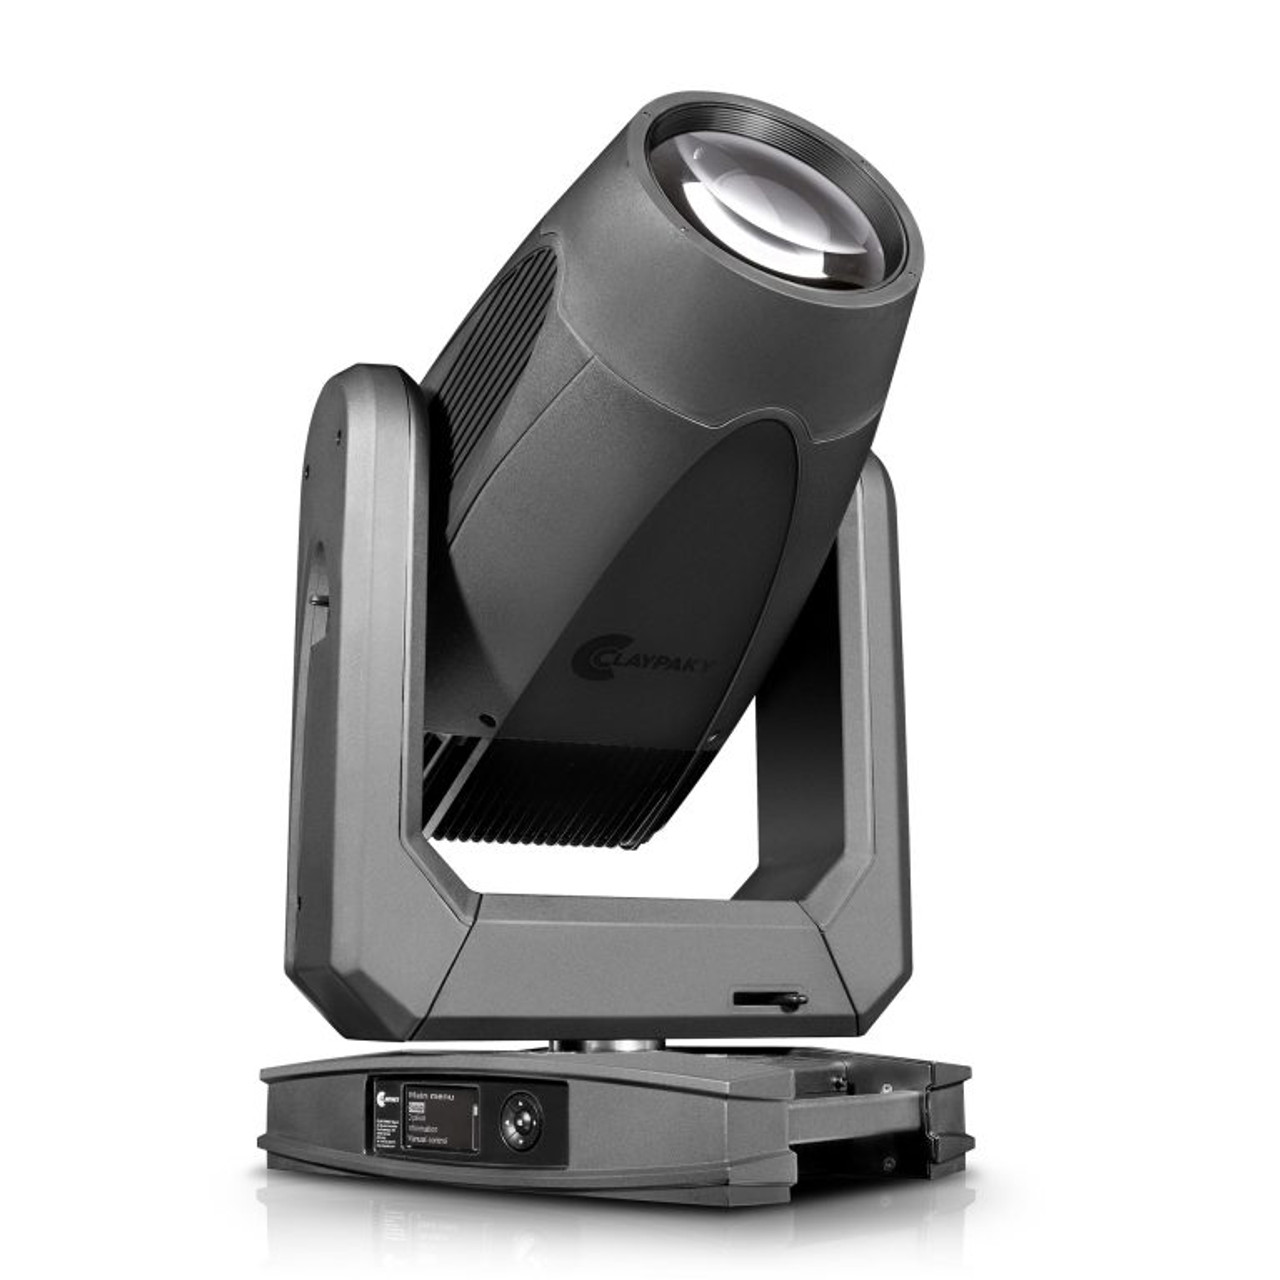 Claypaky CL3018 Sinfonya Profile 600 Moving Head LED Fixture (CL3018E81100S)